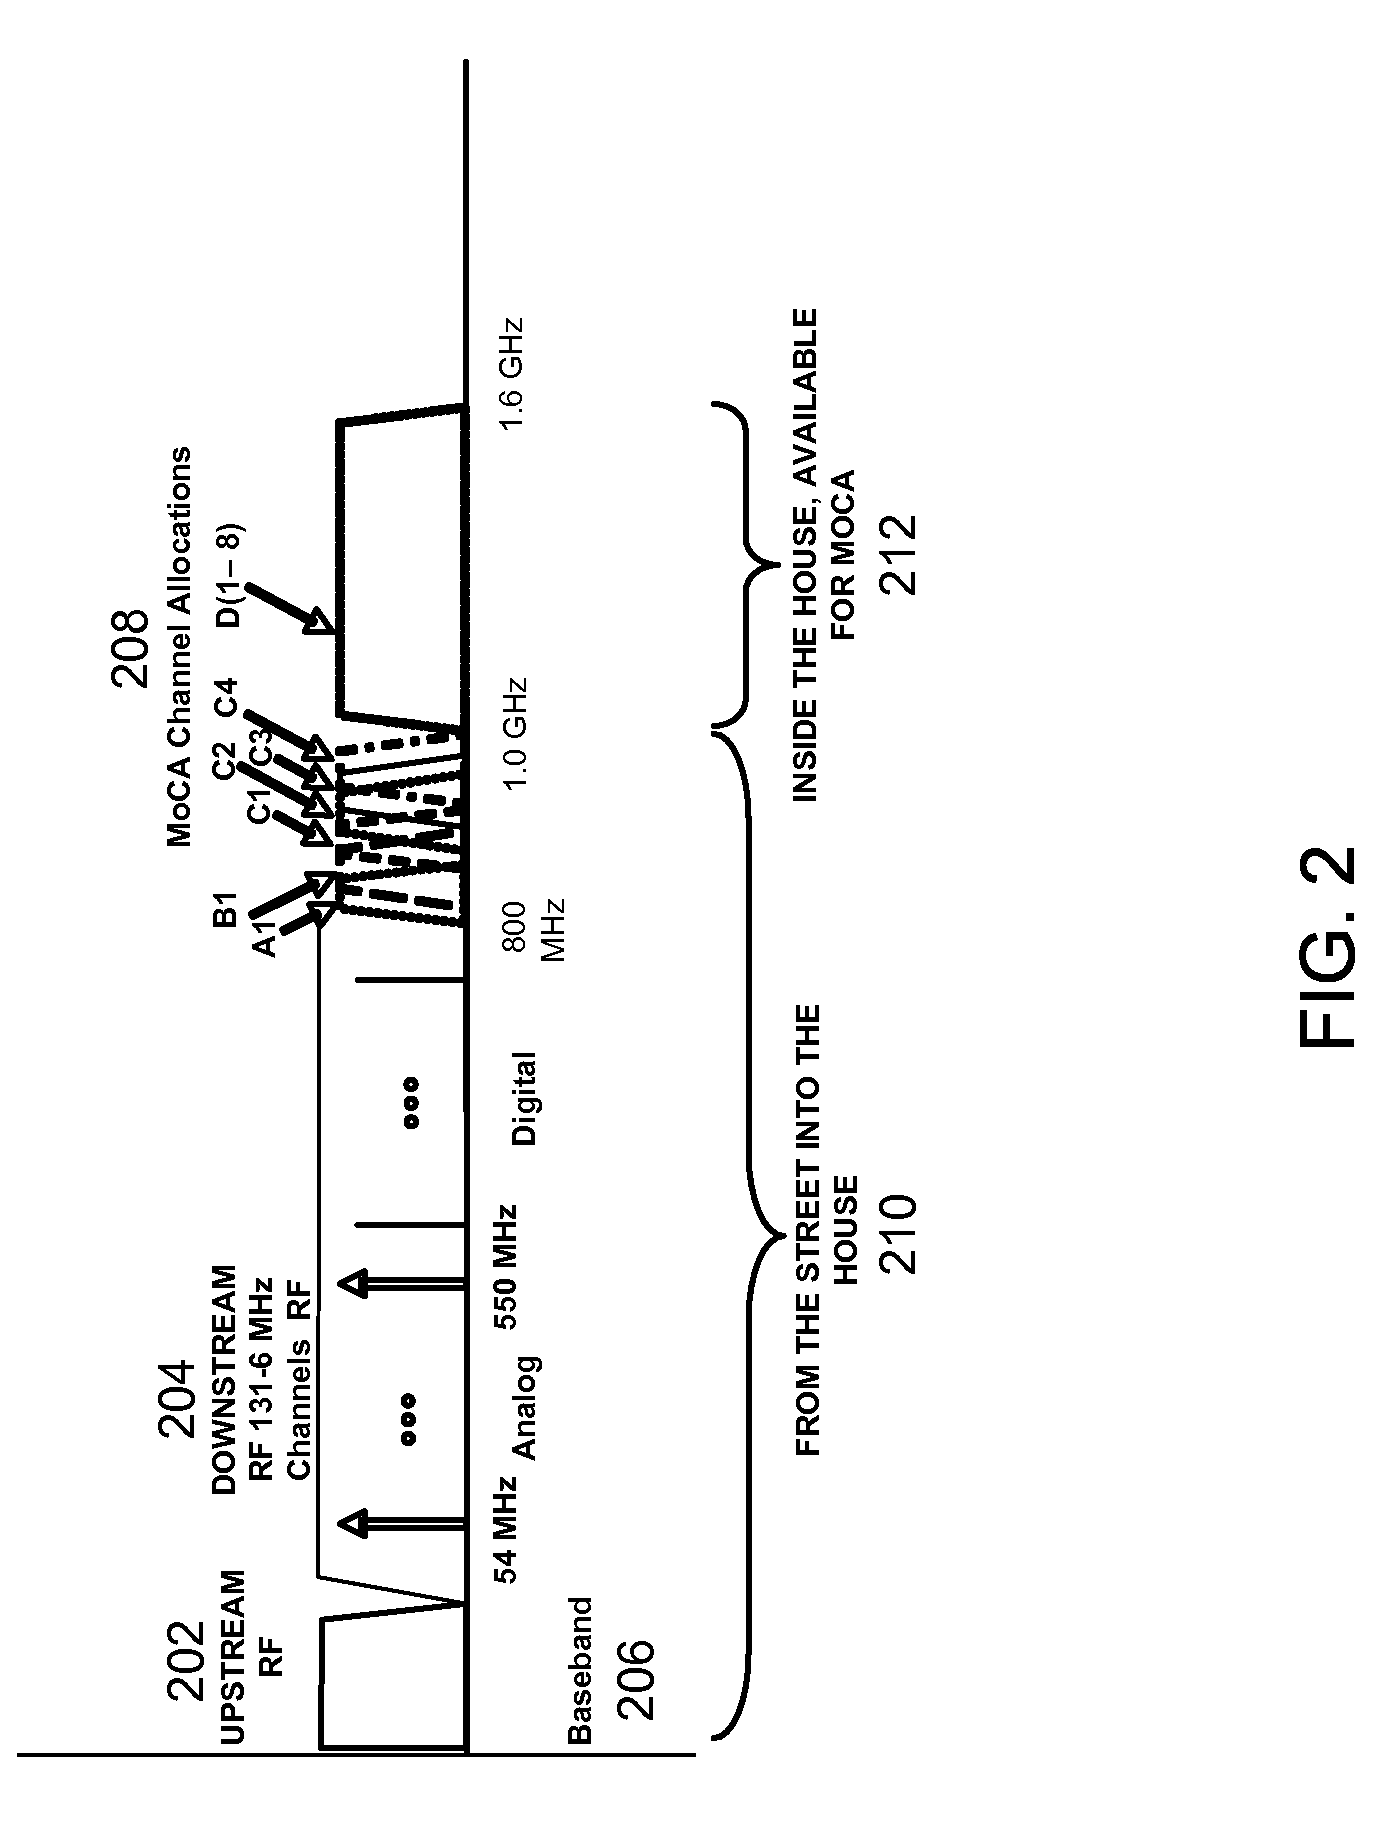 SYSTEMS AND METHODS FOR PROVIDING A MoCA COMPATABILITY STRATEGY